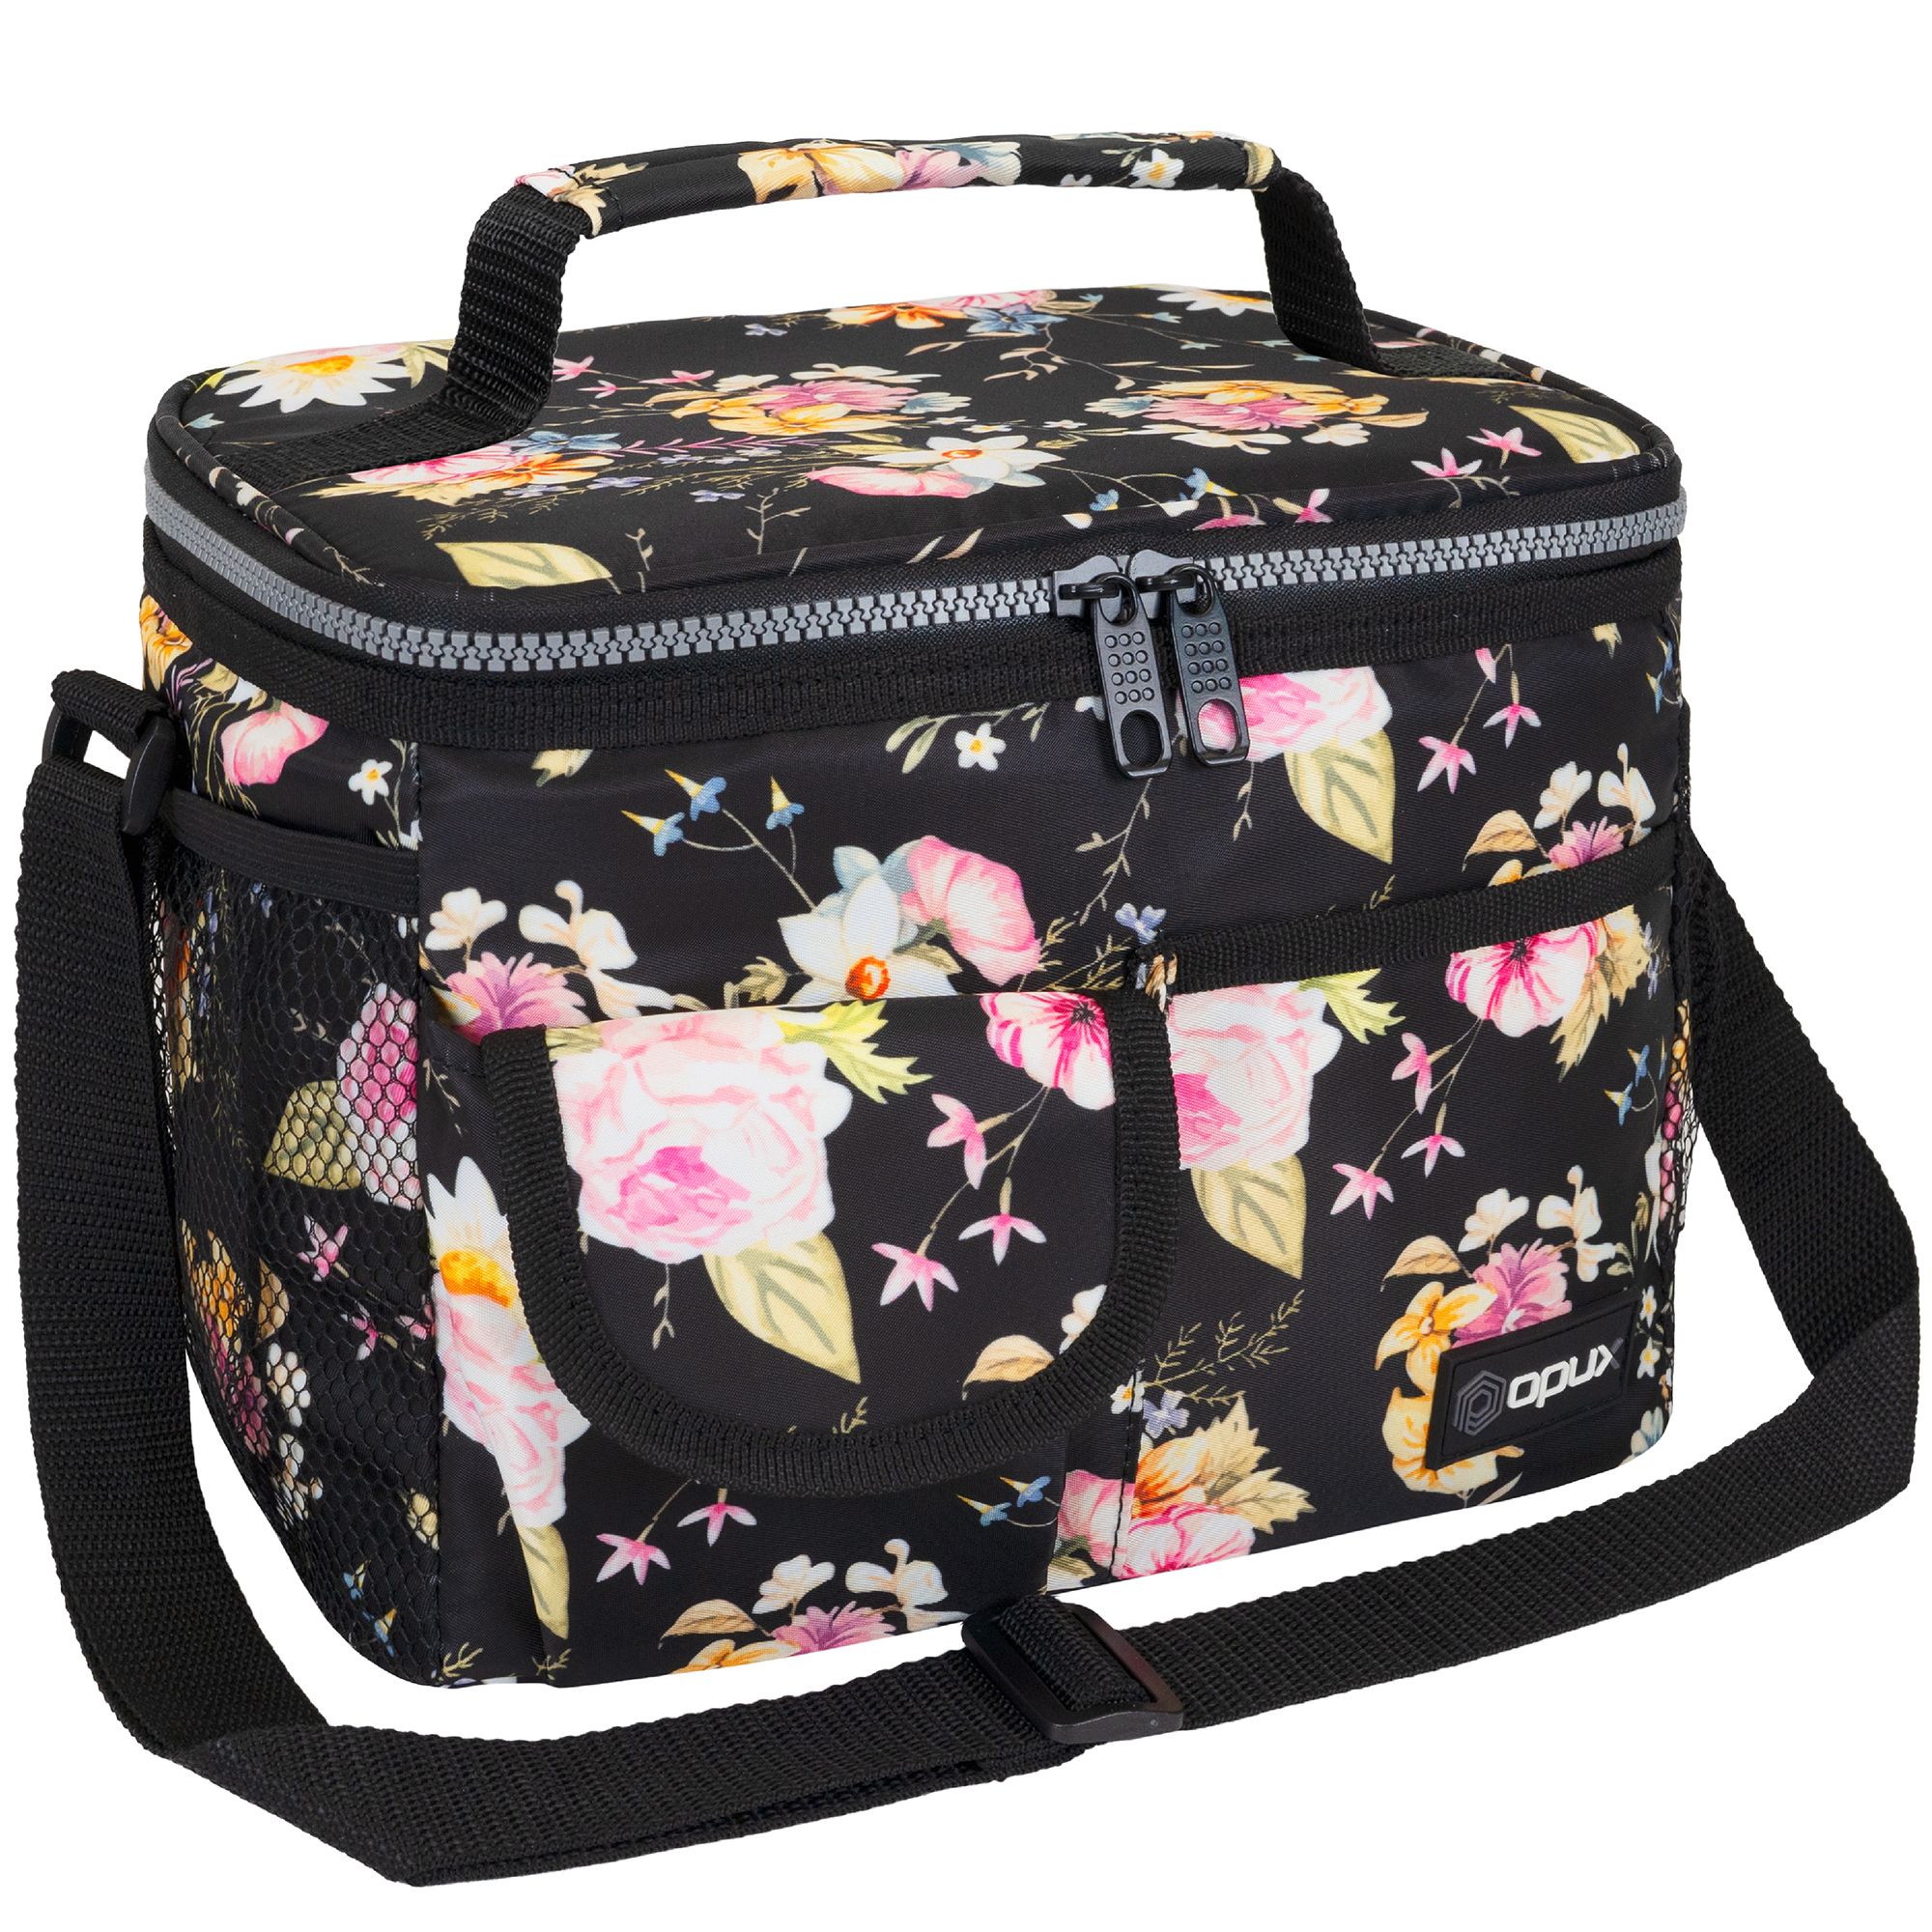 OPUX Insulated Lunch Bag for Men Women, Leakproof Thermal Lunch Box Work School, Soft Lunch Cooler Bag with Adjustable Shoulder Strap for Adult Kid Boy Girl, Reusable Lunch Pail, Black Floral - image 1 of 8